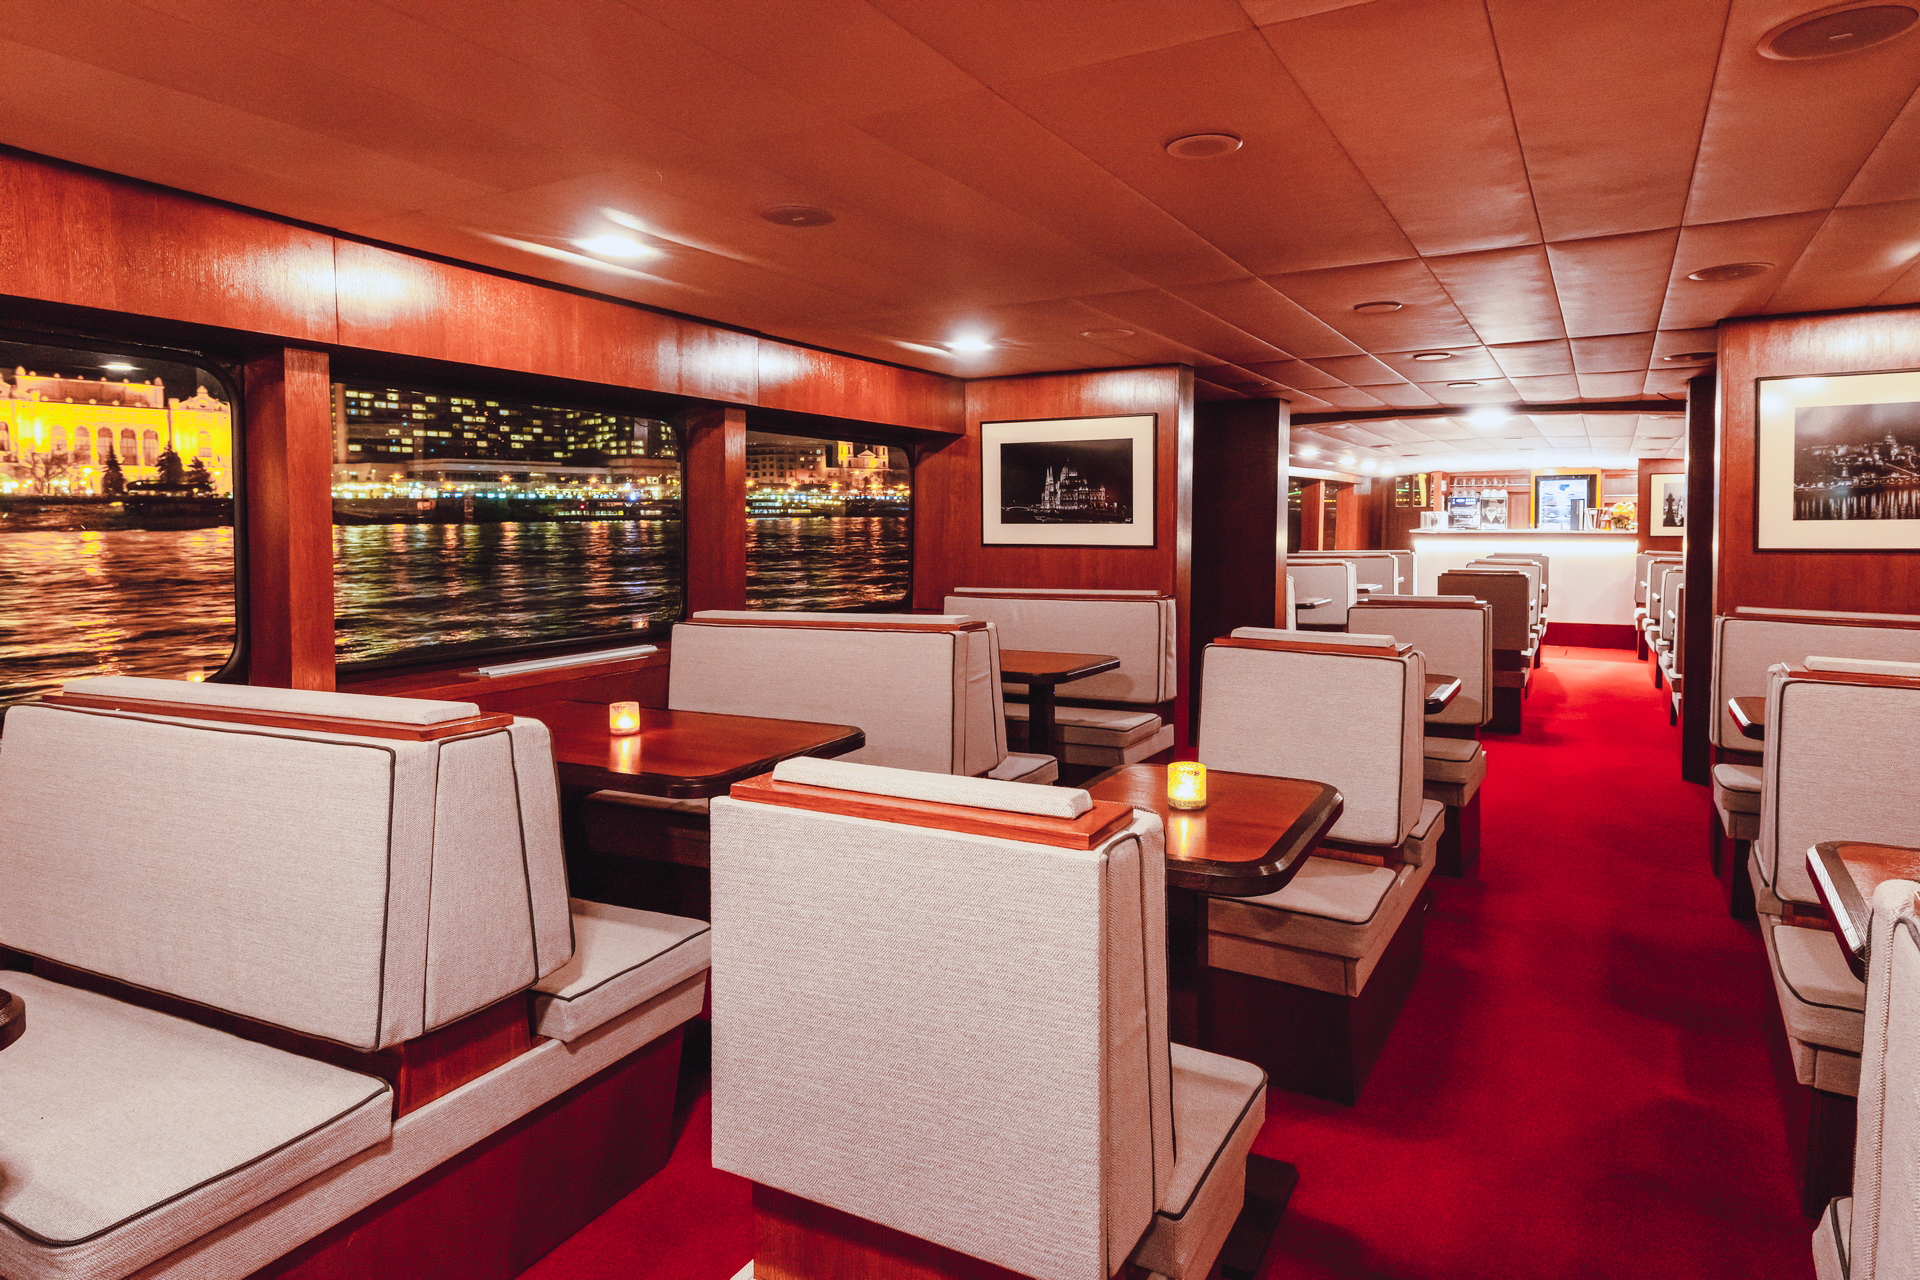 Sightseeing Boat Interior in the evening